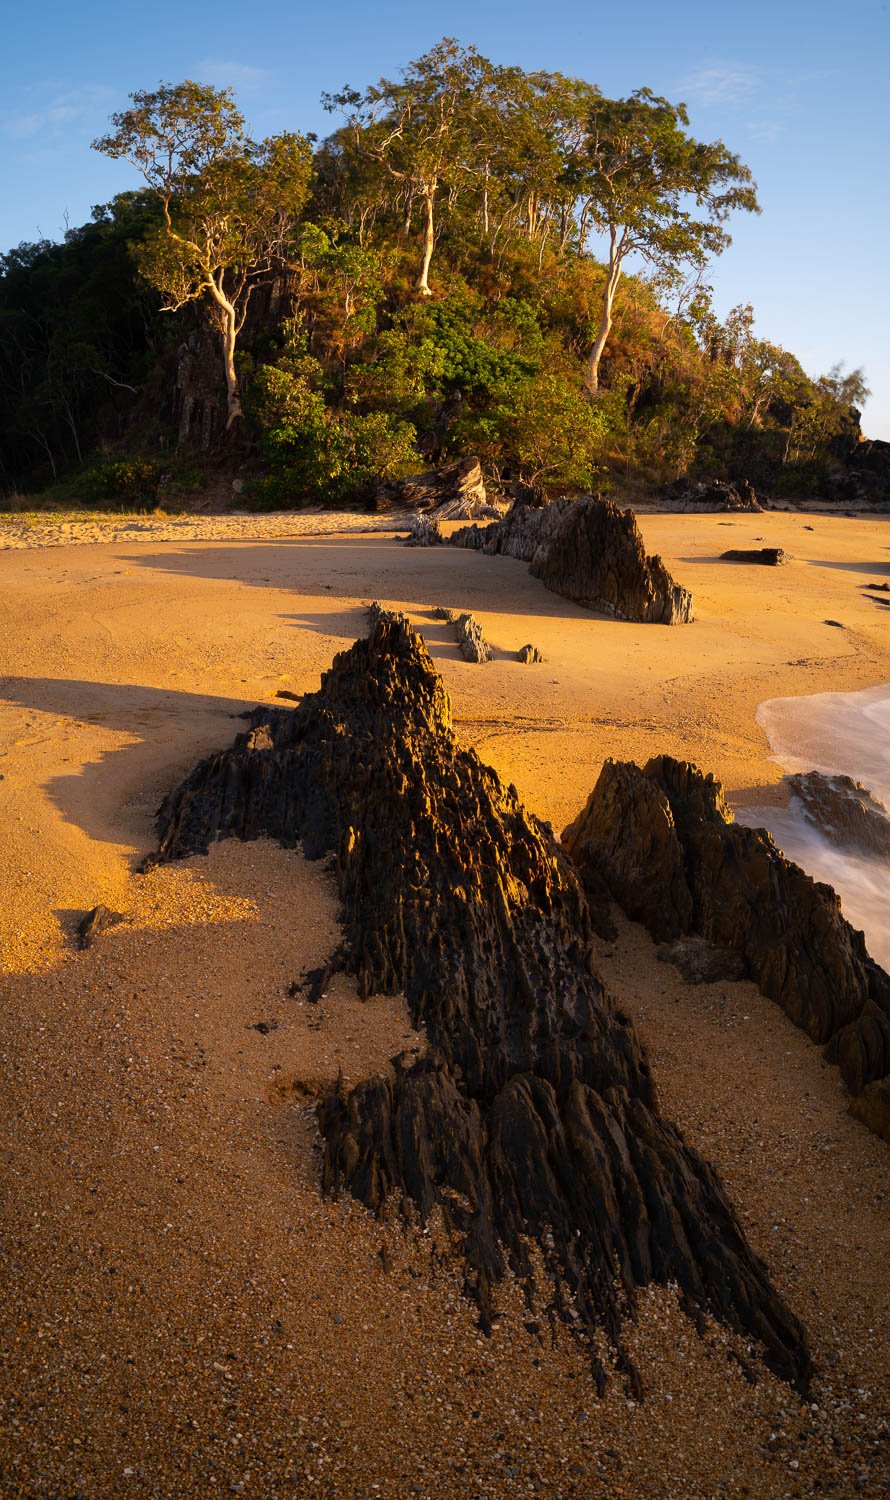 A thick group of long trees on a beach-like surface, Palm Cove Beach, Far North Queensland